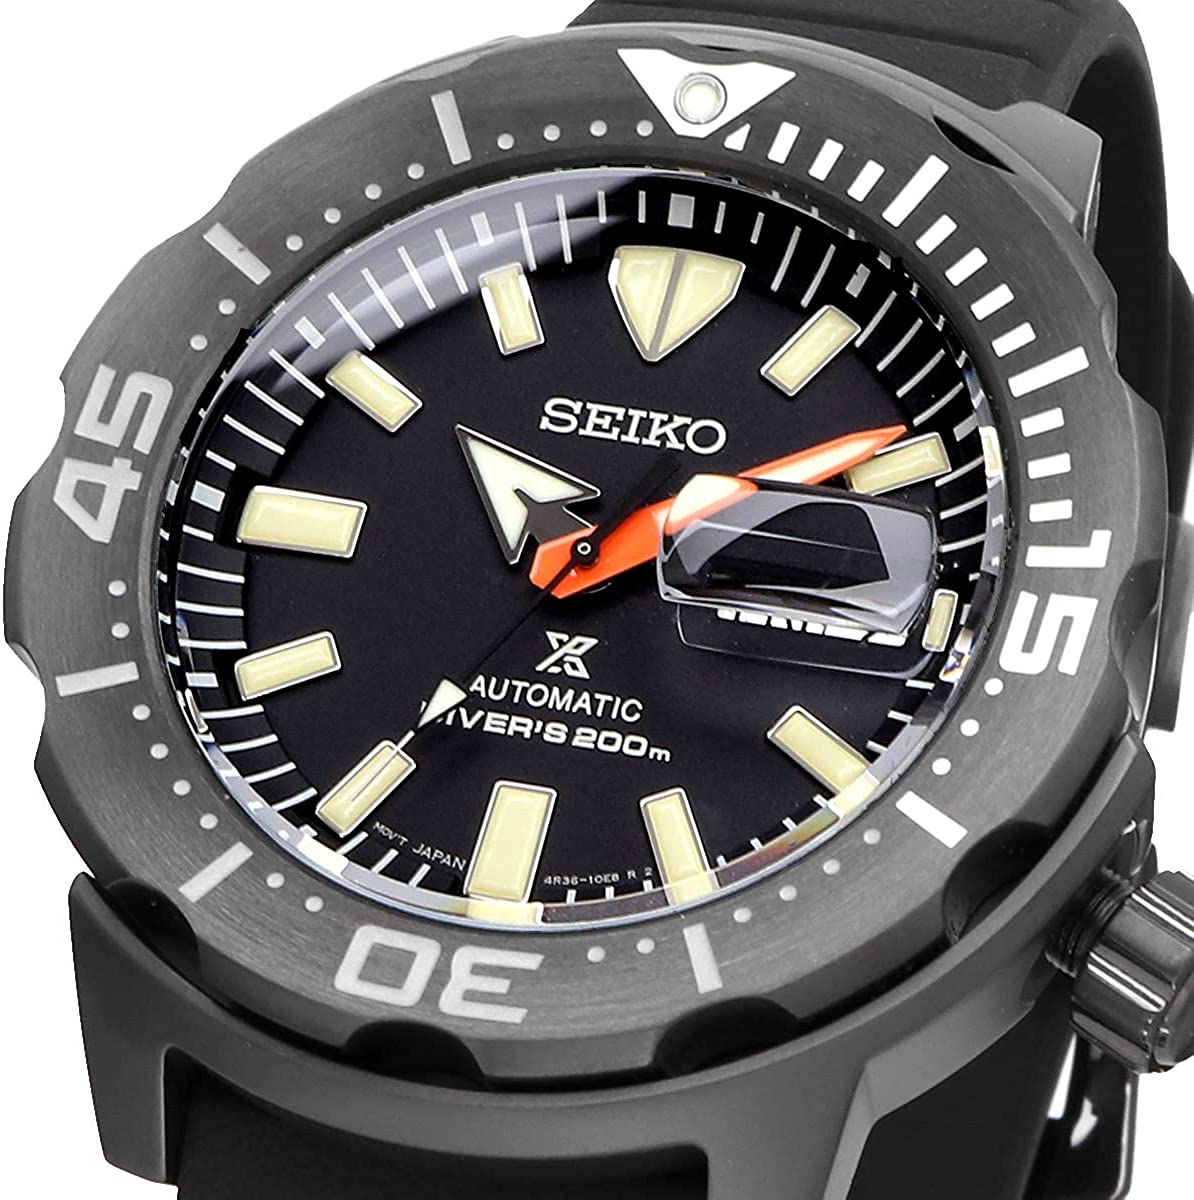 SEIKO Watch PROSPEX Mechanical Automatic Winding The Black Series Limited  Edition Automatic MONSTER Diver s 200m Black Series Limited Model Monster  Divers SRPH13 Men's Overseas Model (Parallel Import) - Discovery Japan Mall